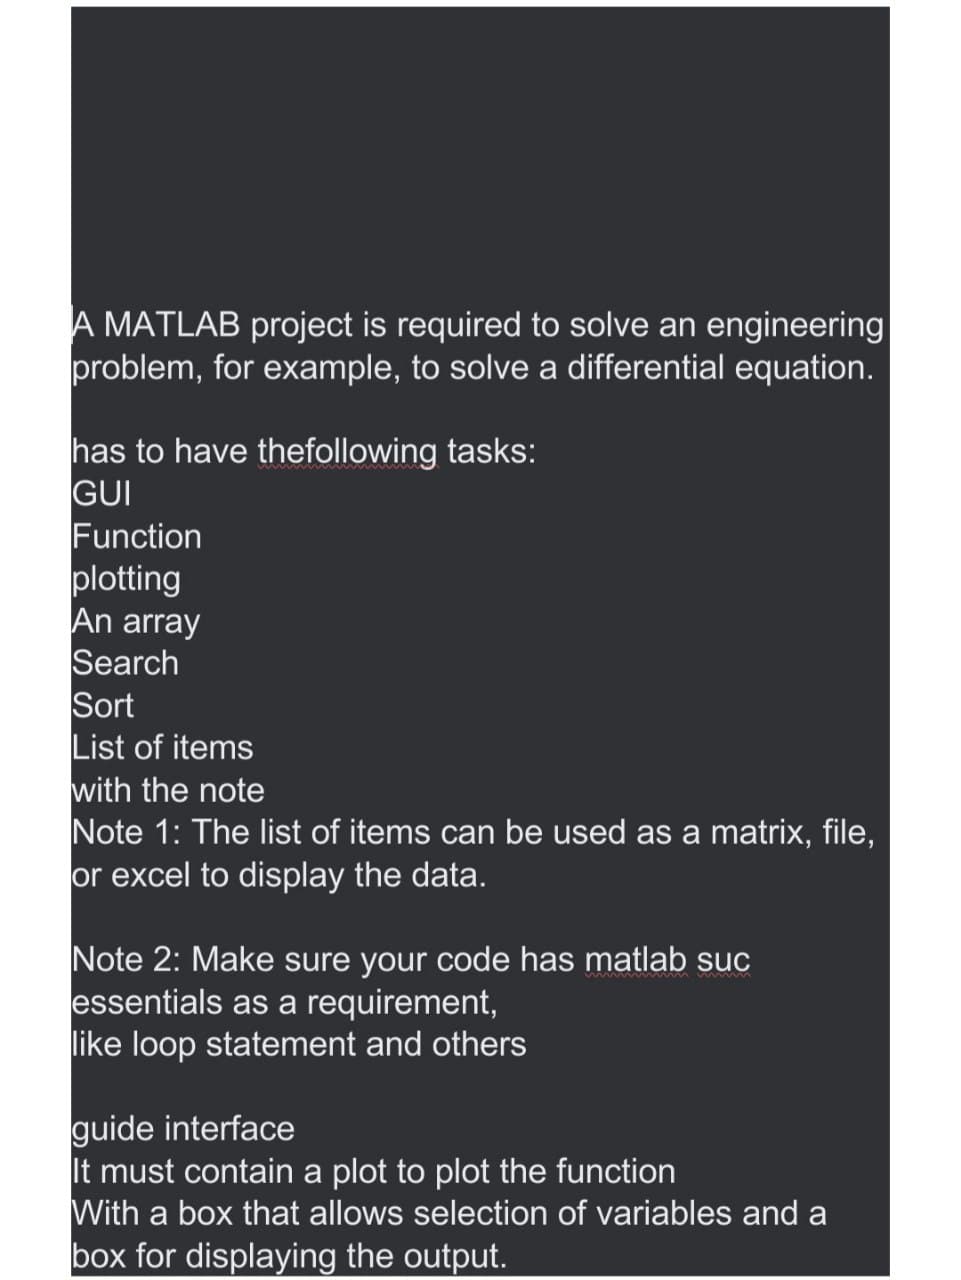 A MATLAB project is required to solve an engineering
problem, for example, to solve a differential equation.
has to have the following tasks:
GUI
Function
plotting
An array
Search
Sort
List of items
with the note
Note 1: The list of items can be used as a matrix, file,
or excel to display the data.
Note 2: Make sure your code has matlab suc
essentials as a requirement,
like loop statement and others
guide interface
It must contain a plot to plot the function
With a box that allows selection of variables and a
box for displaying the output.